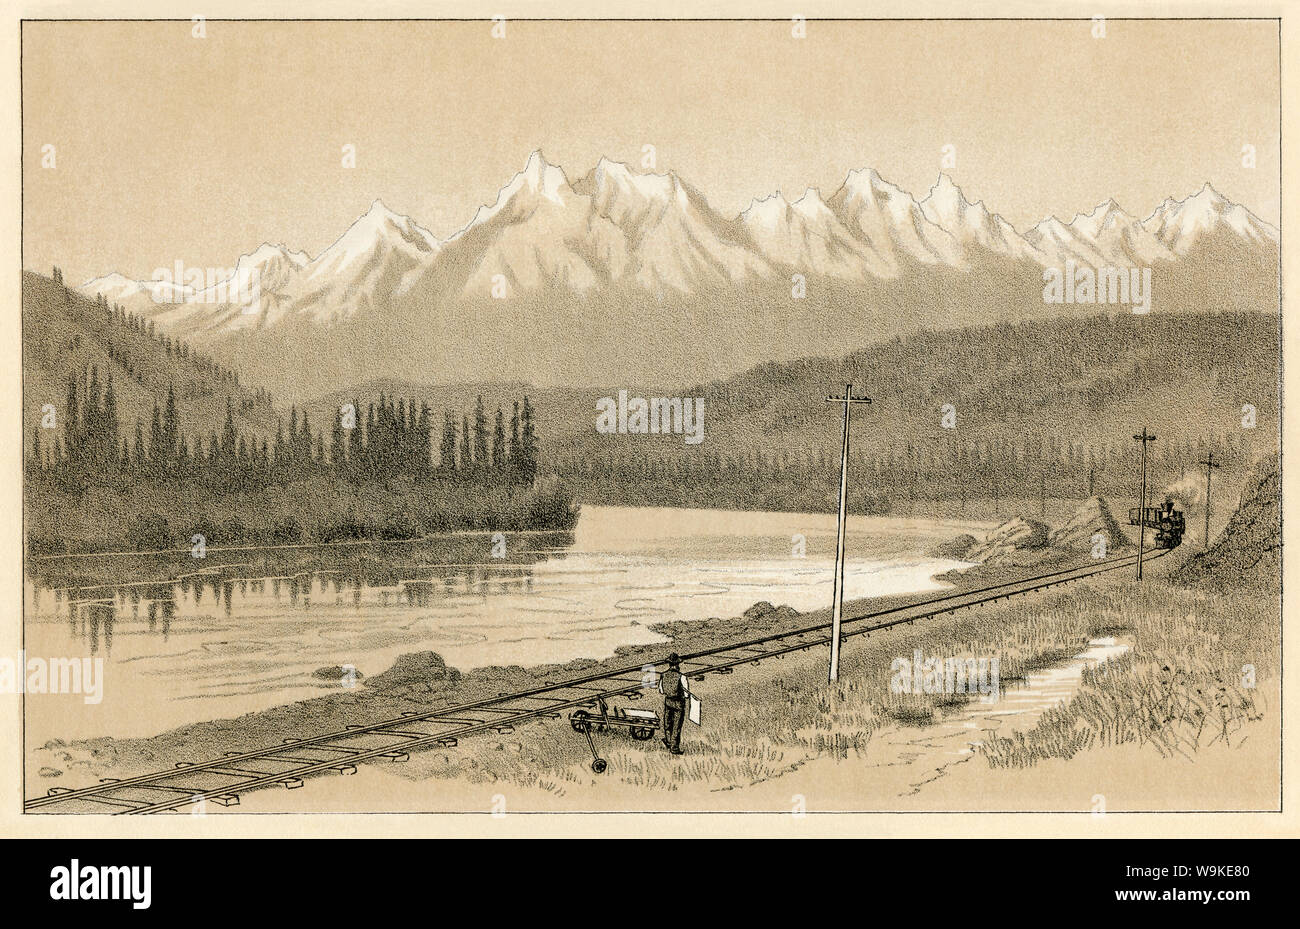 Northern Pacific Railroad entlang Clark's Fork in der Nähe von Perma, Montana, 1880. Lithographie Stockfoto